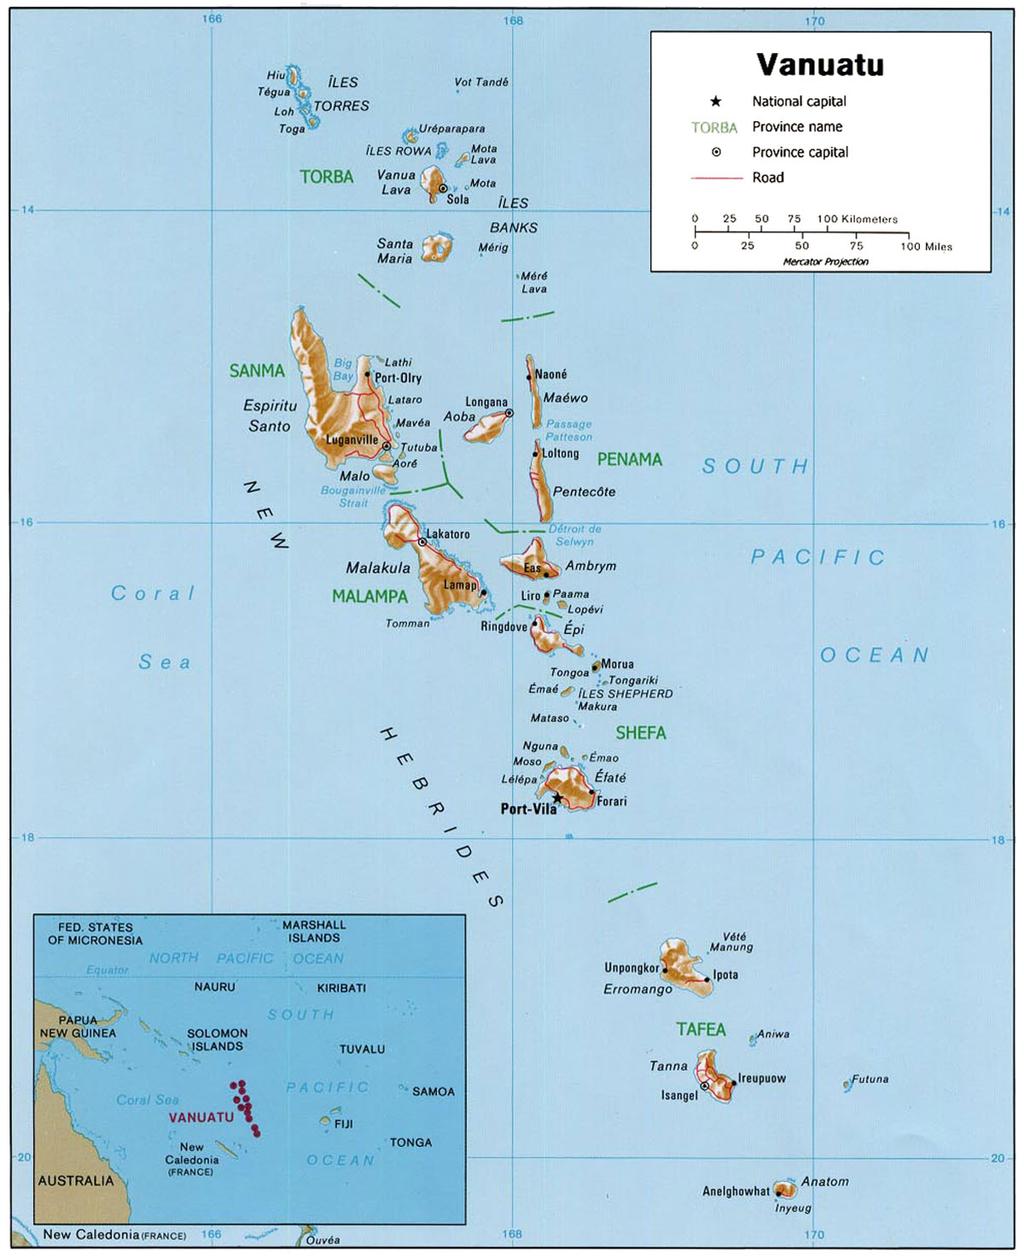 Figure 1: Map of Vanuatu Source: Nationsonline (2017). Reproduced under Creative Commons Licence.